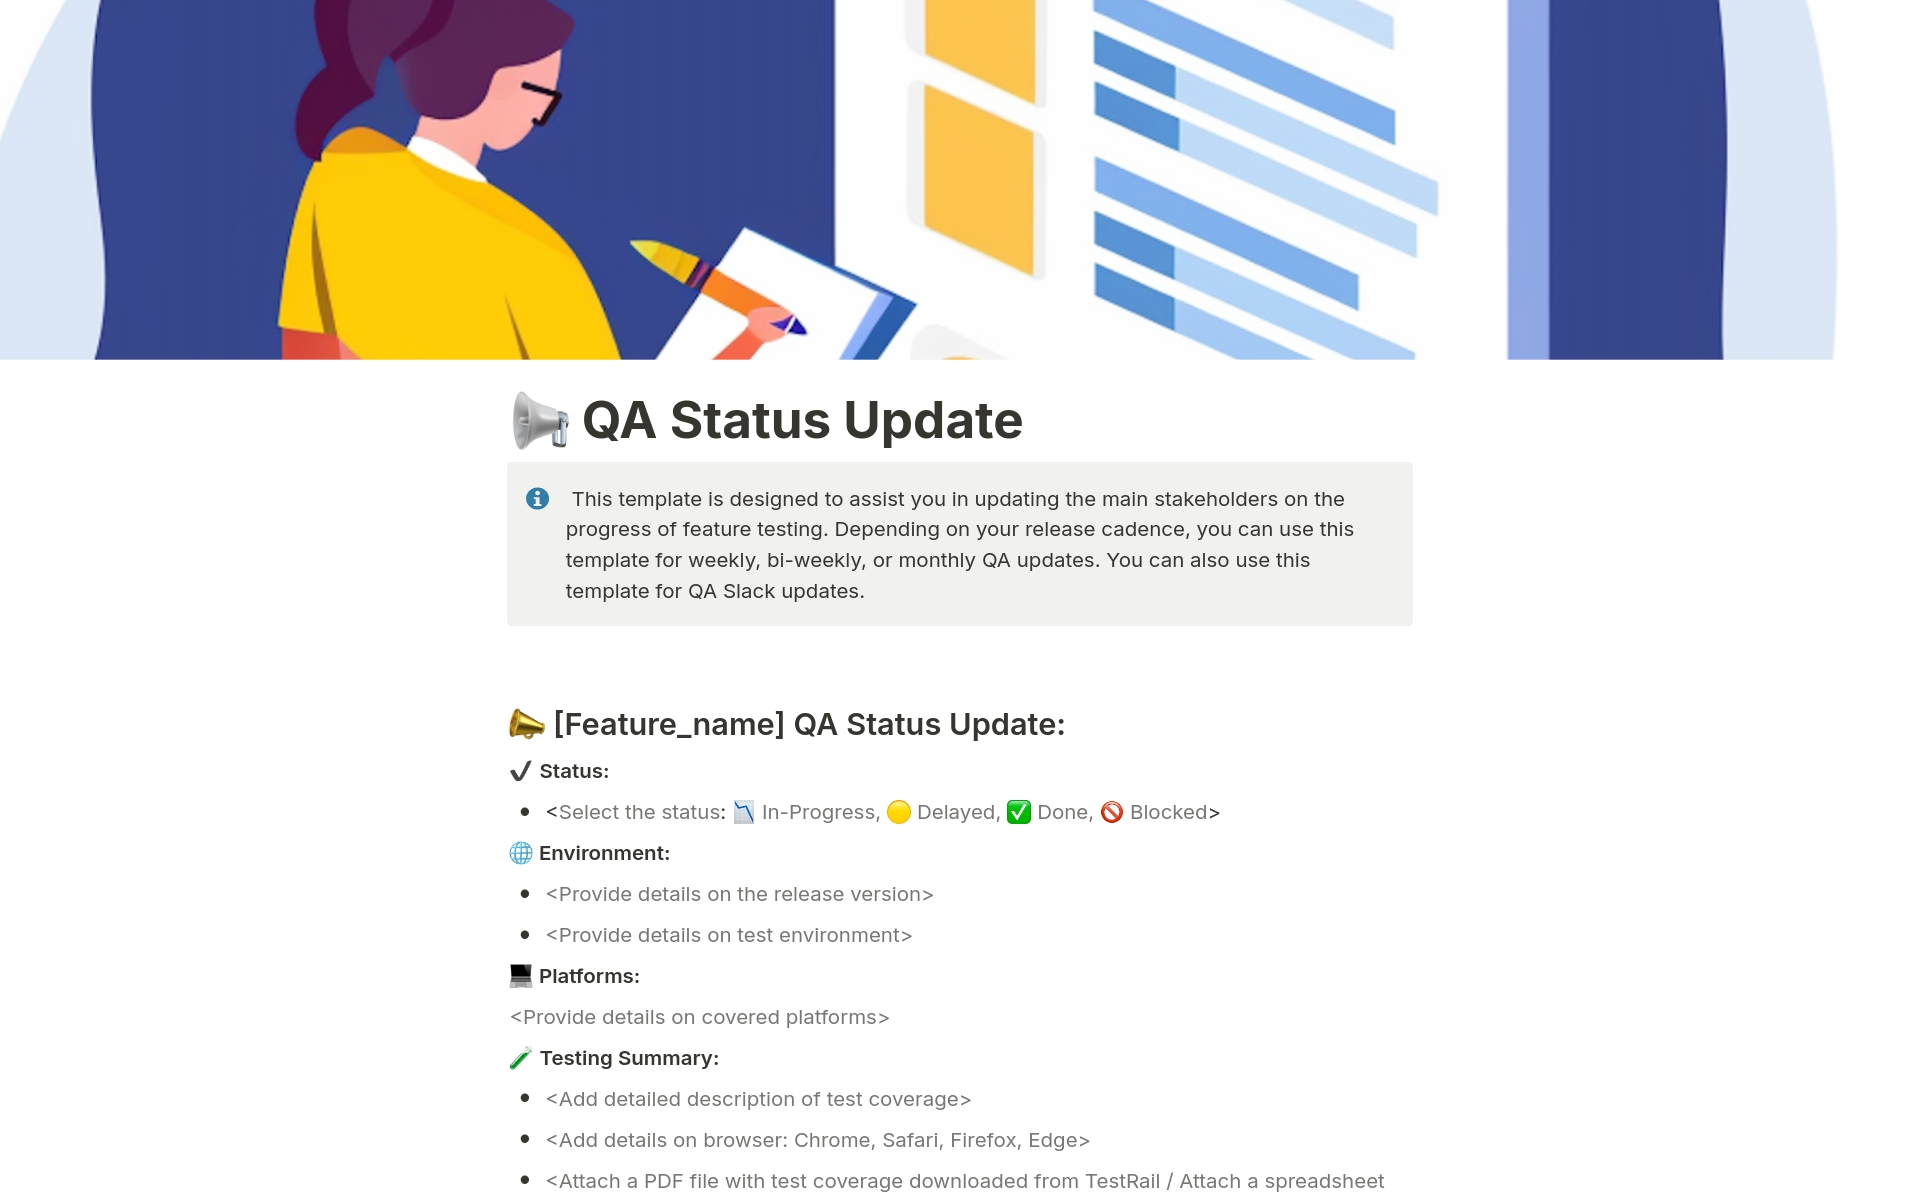 🧪 The purpose of this QA Status Update template is to provide a structured update to the main stakeholders on testing progress. This template ensures that all relevant information is communicated clearly and helping stakeholders understand the current status of testing.